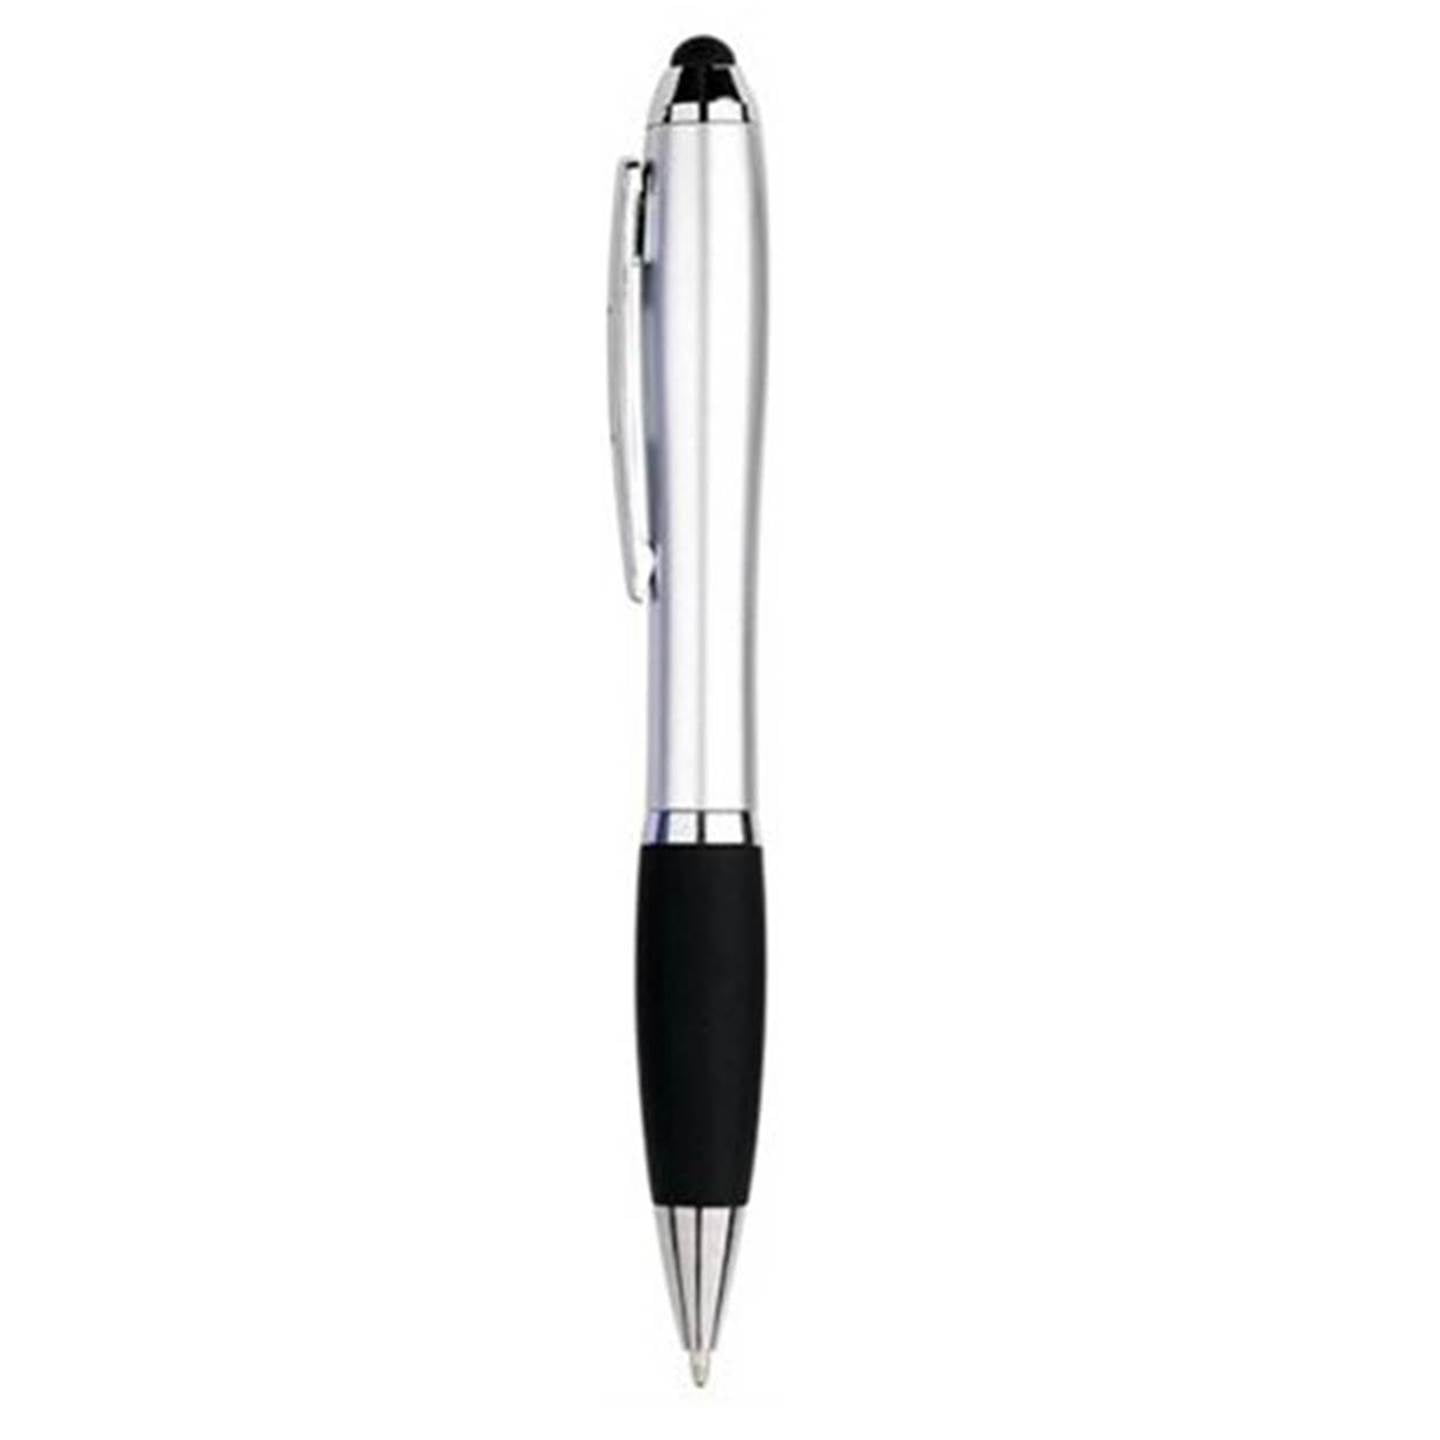 2 in 1 Universal Touch Screen Stylus Ballpoint Pen For iPhone iPad Smartphone PC 